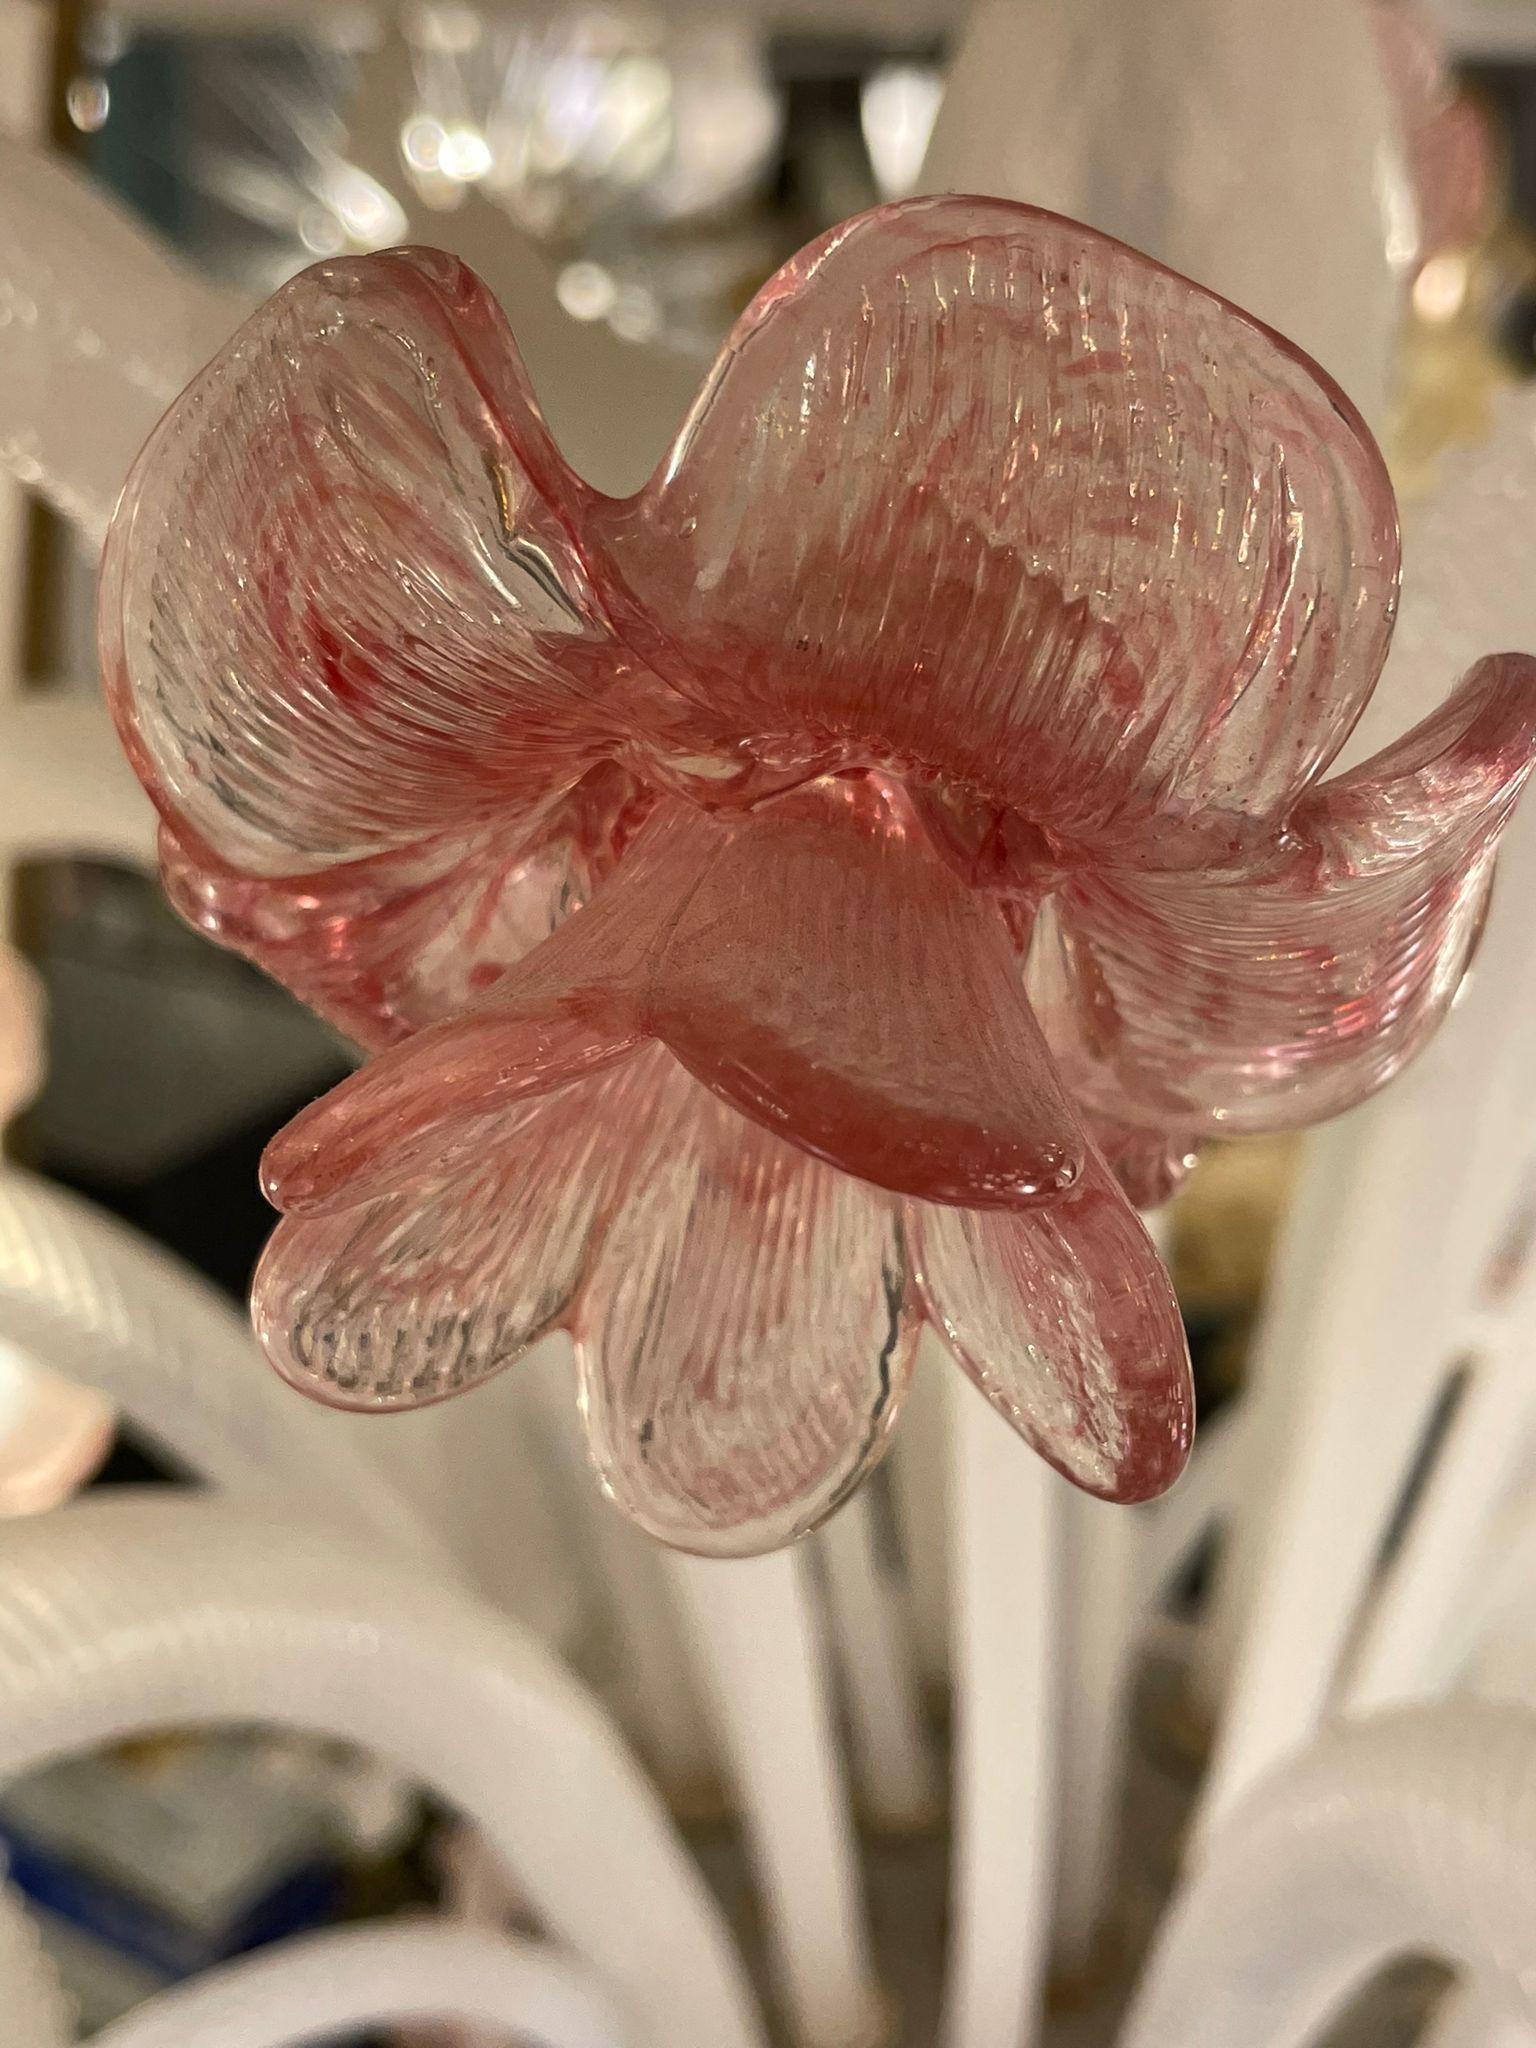 Mid-20th Century Italian Murano Chandelier 8 Arms, Pink Glass Flowers and Leaves, circa 1960s For Sale